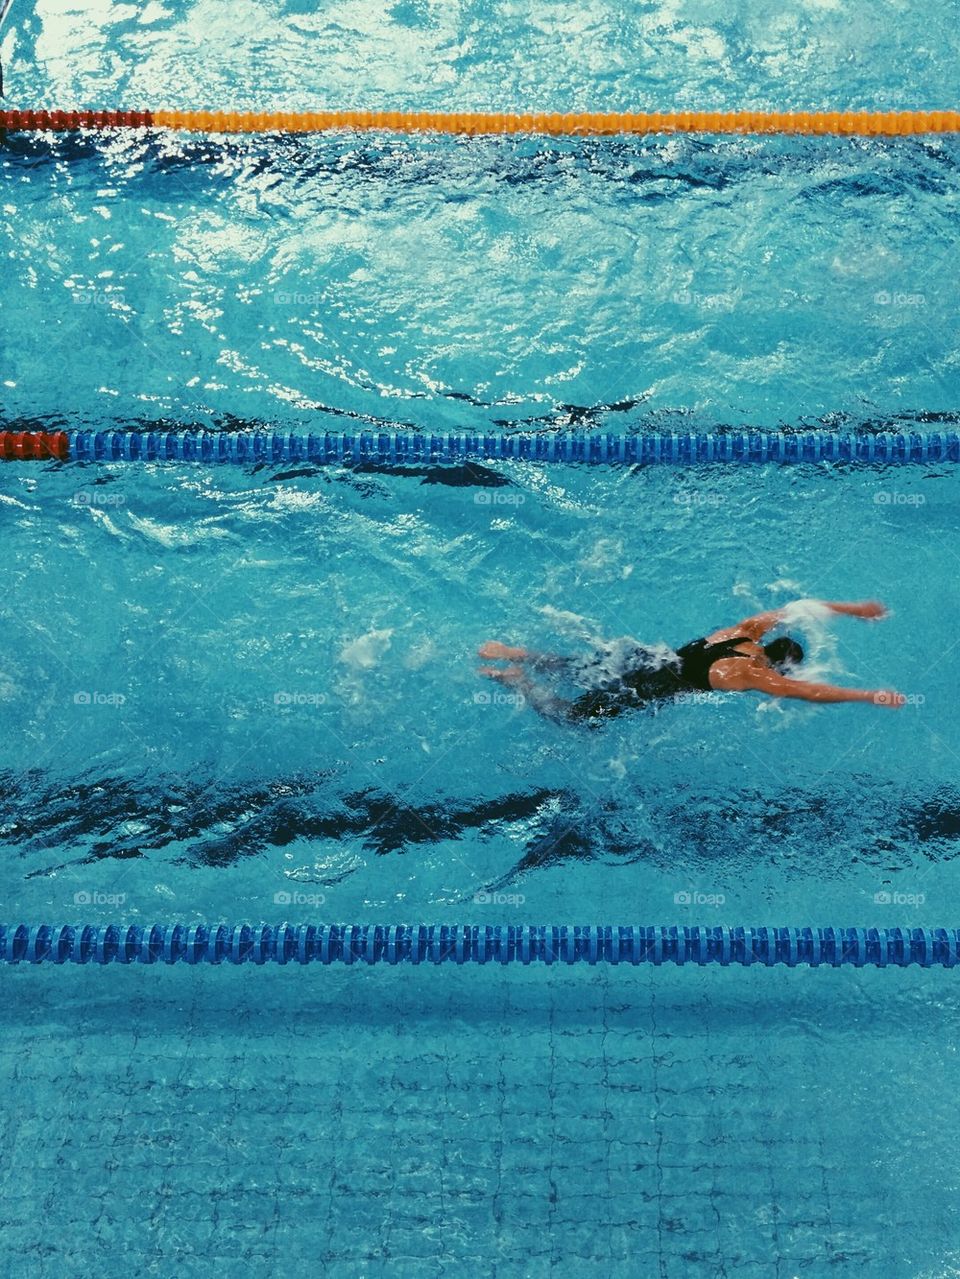 Competition swimmer